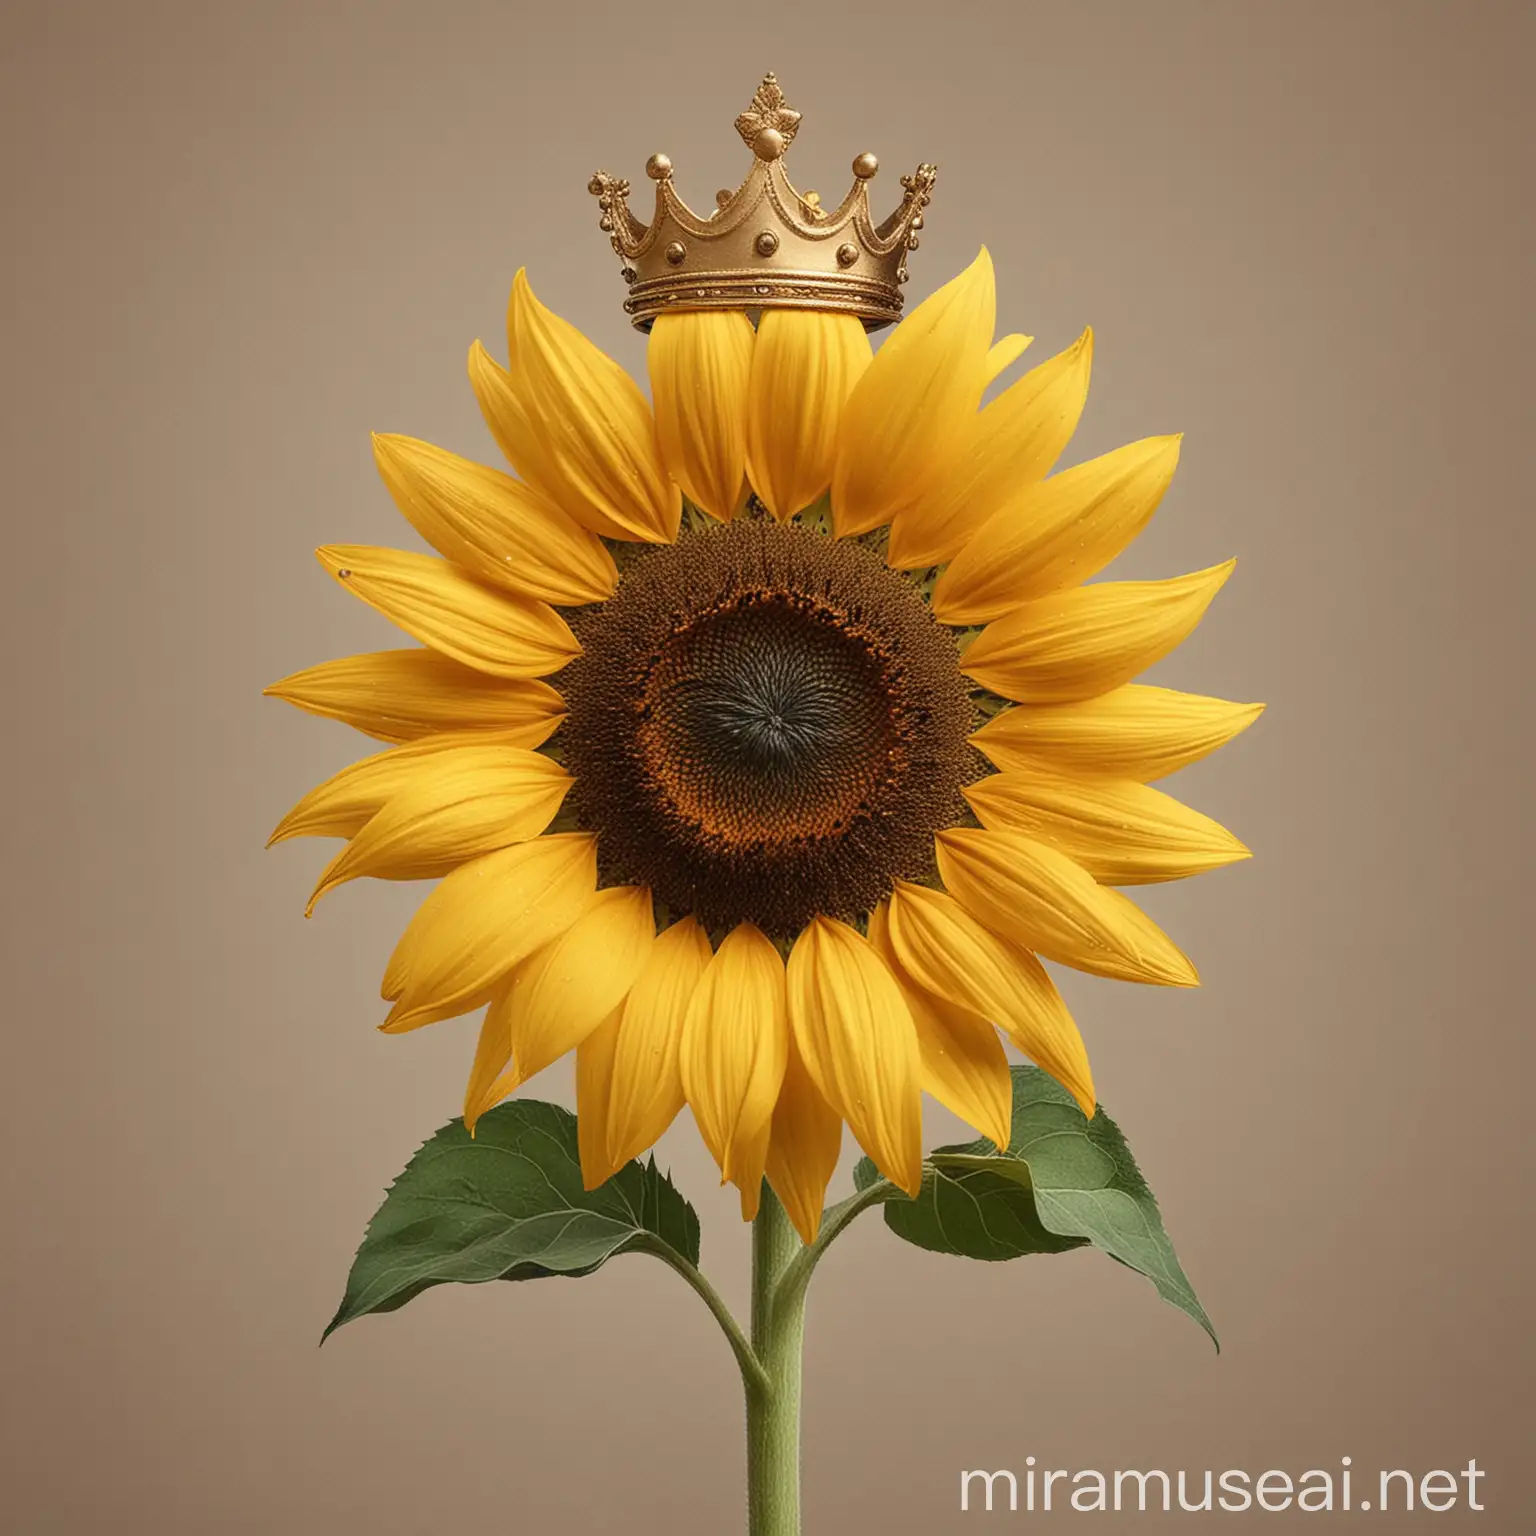 Sunflower with crown 